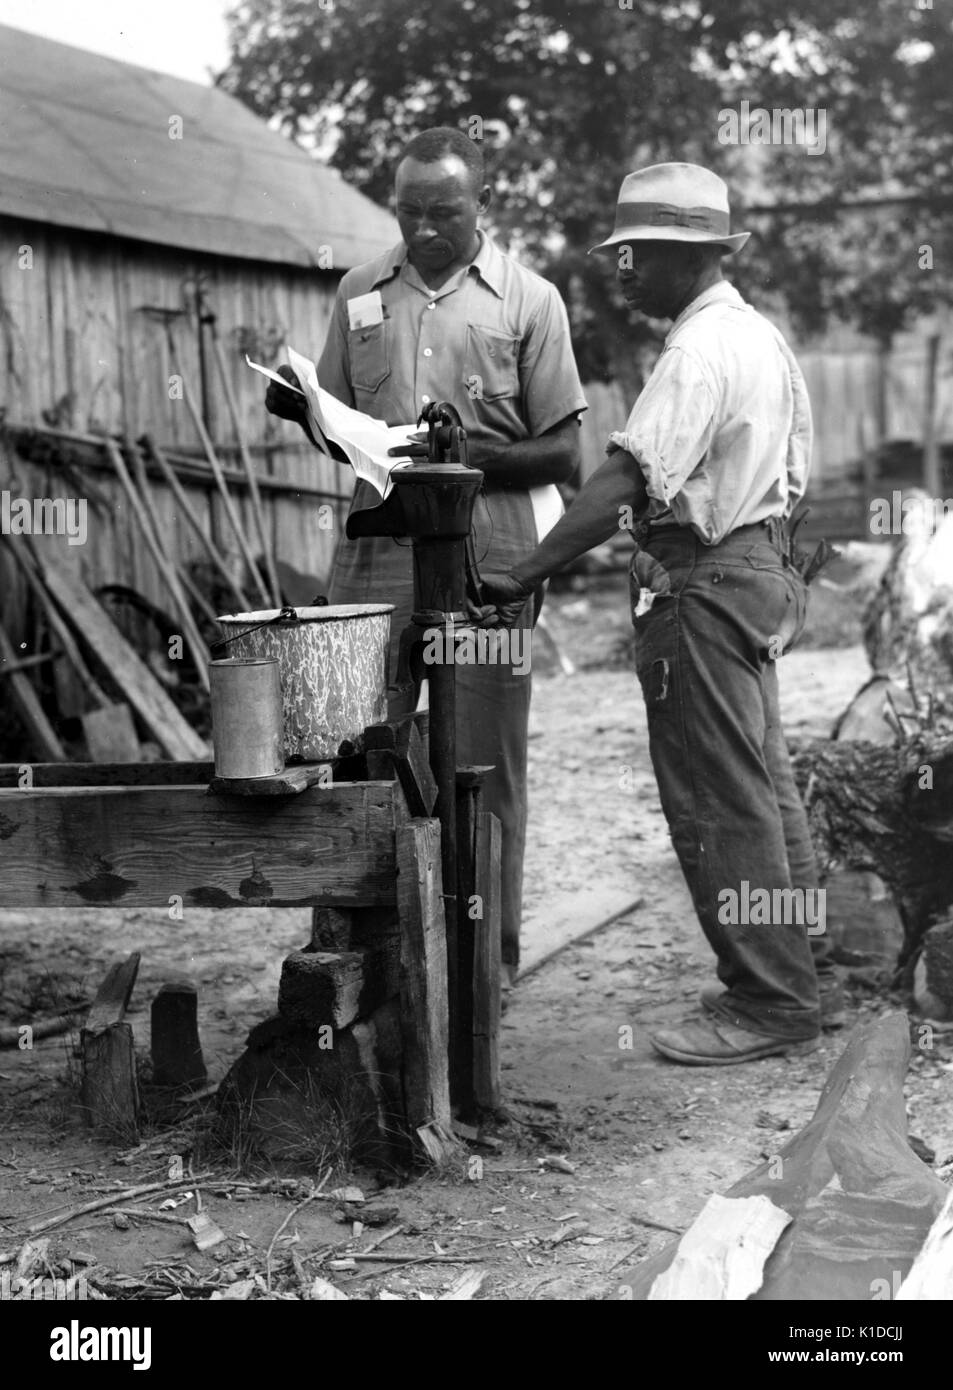 An African-American Farm Security Administration supervisor consults with a borrower about unsanitary water supply, safe well demonstration, near La Plata, Maryland, 1900. From the New York Public Library. Stock Photo